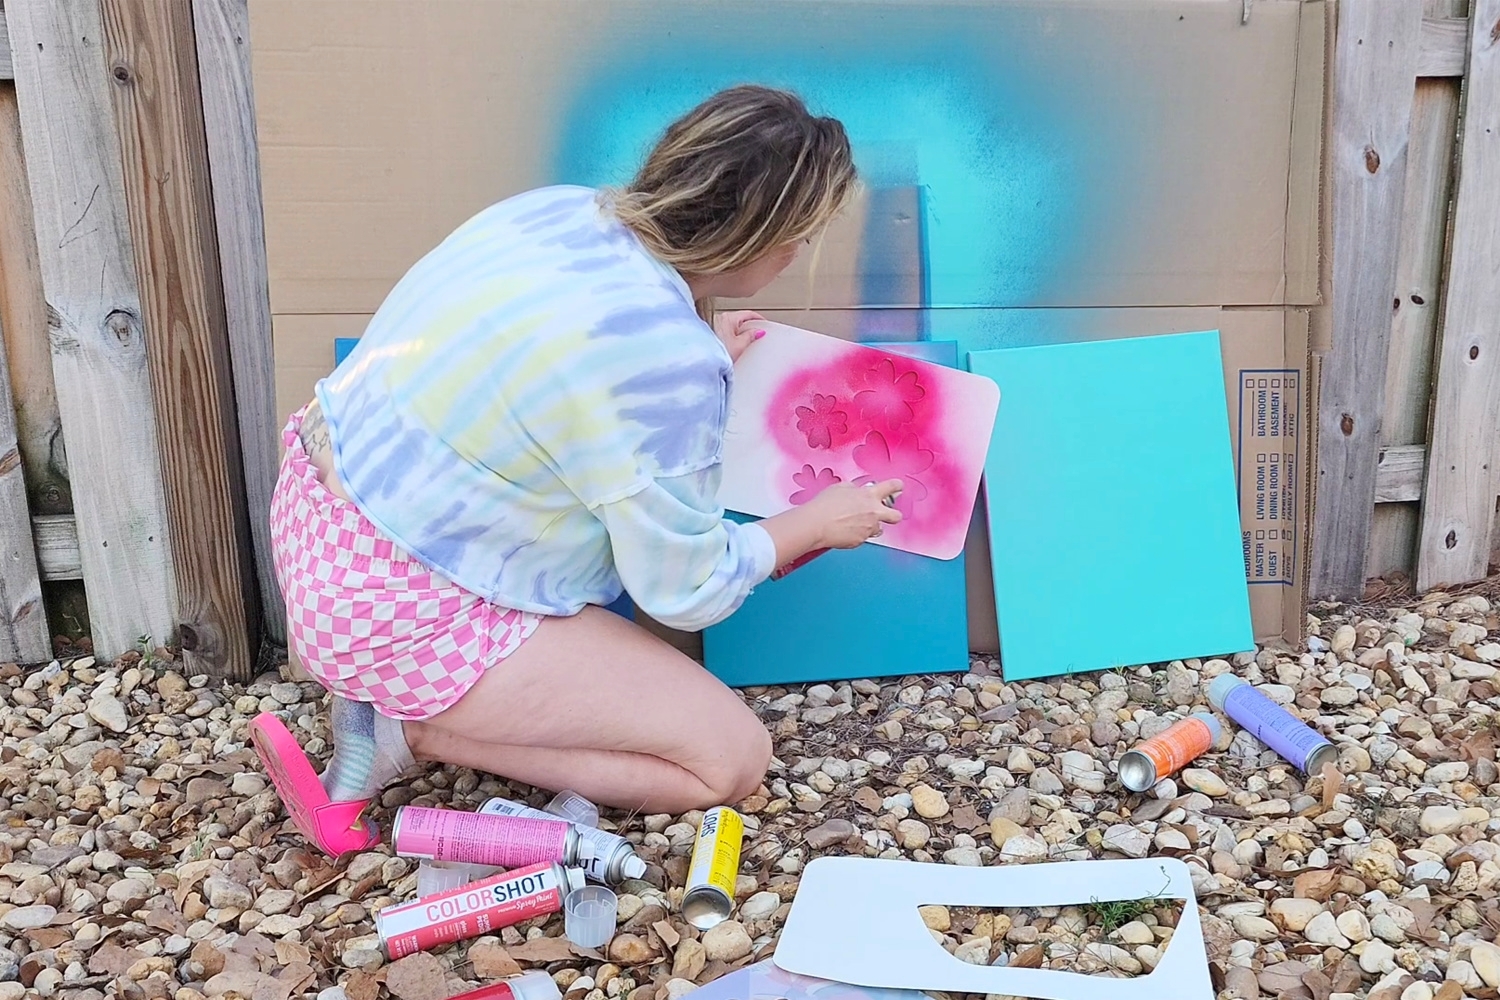 Use a stencil to spray paint flowers